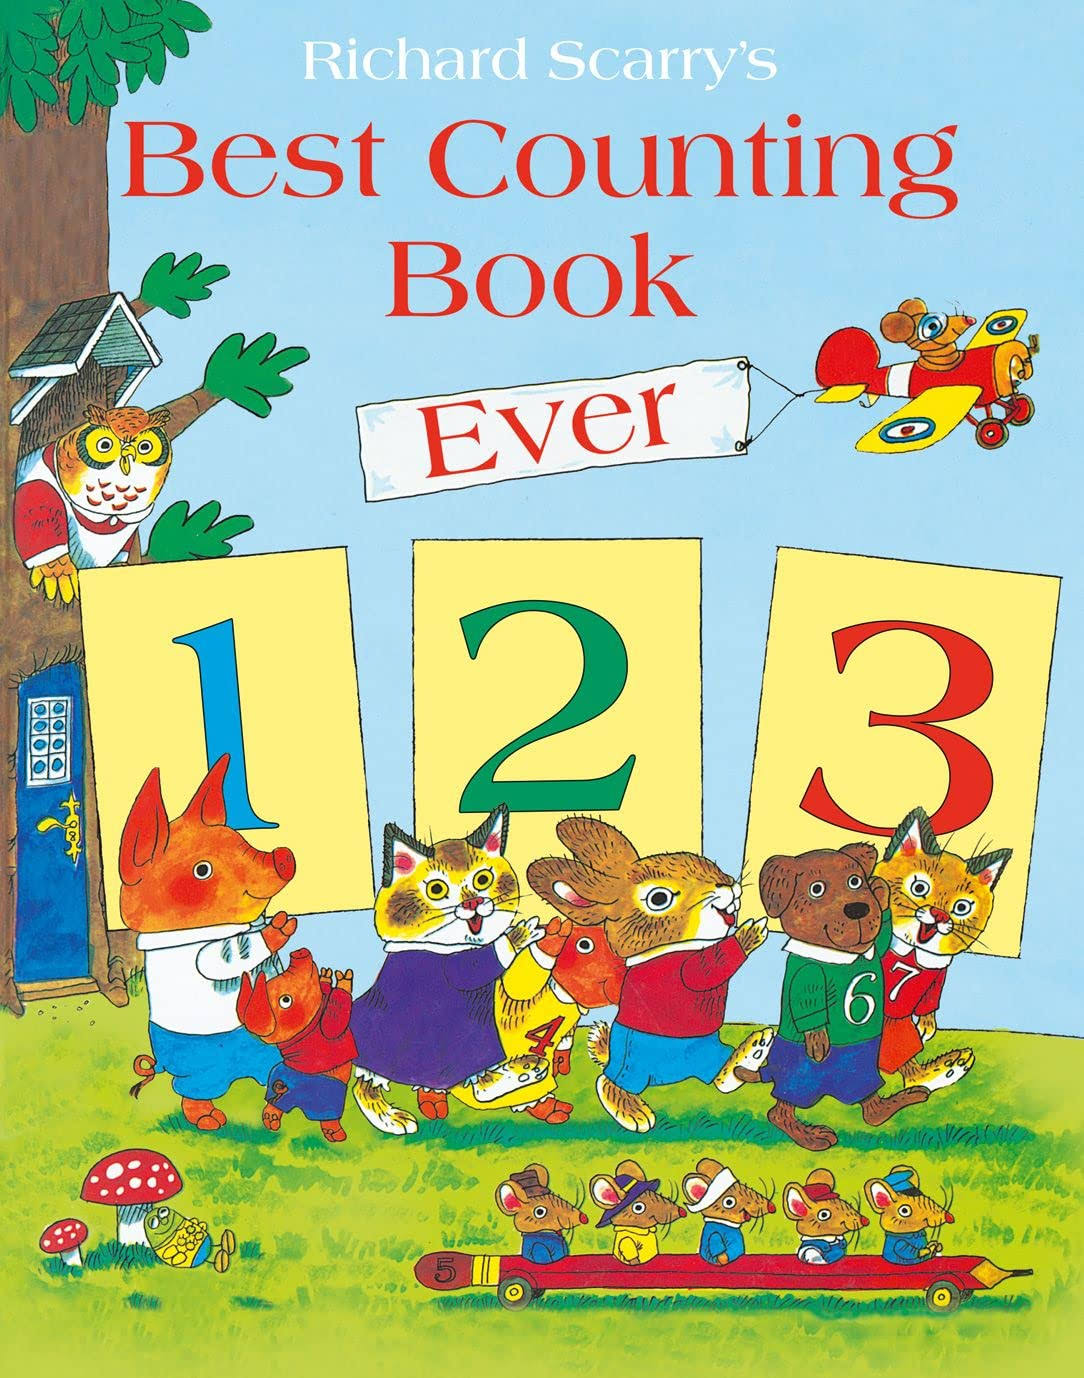 Best Counting Book Ever [Book]